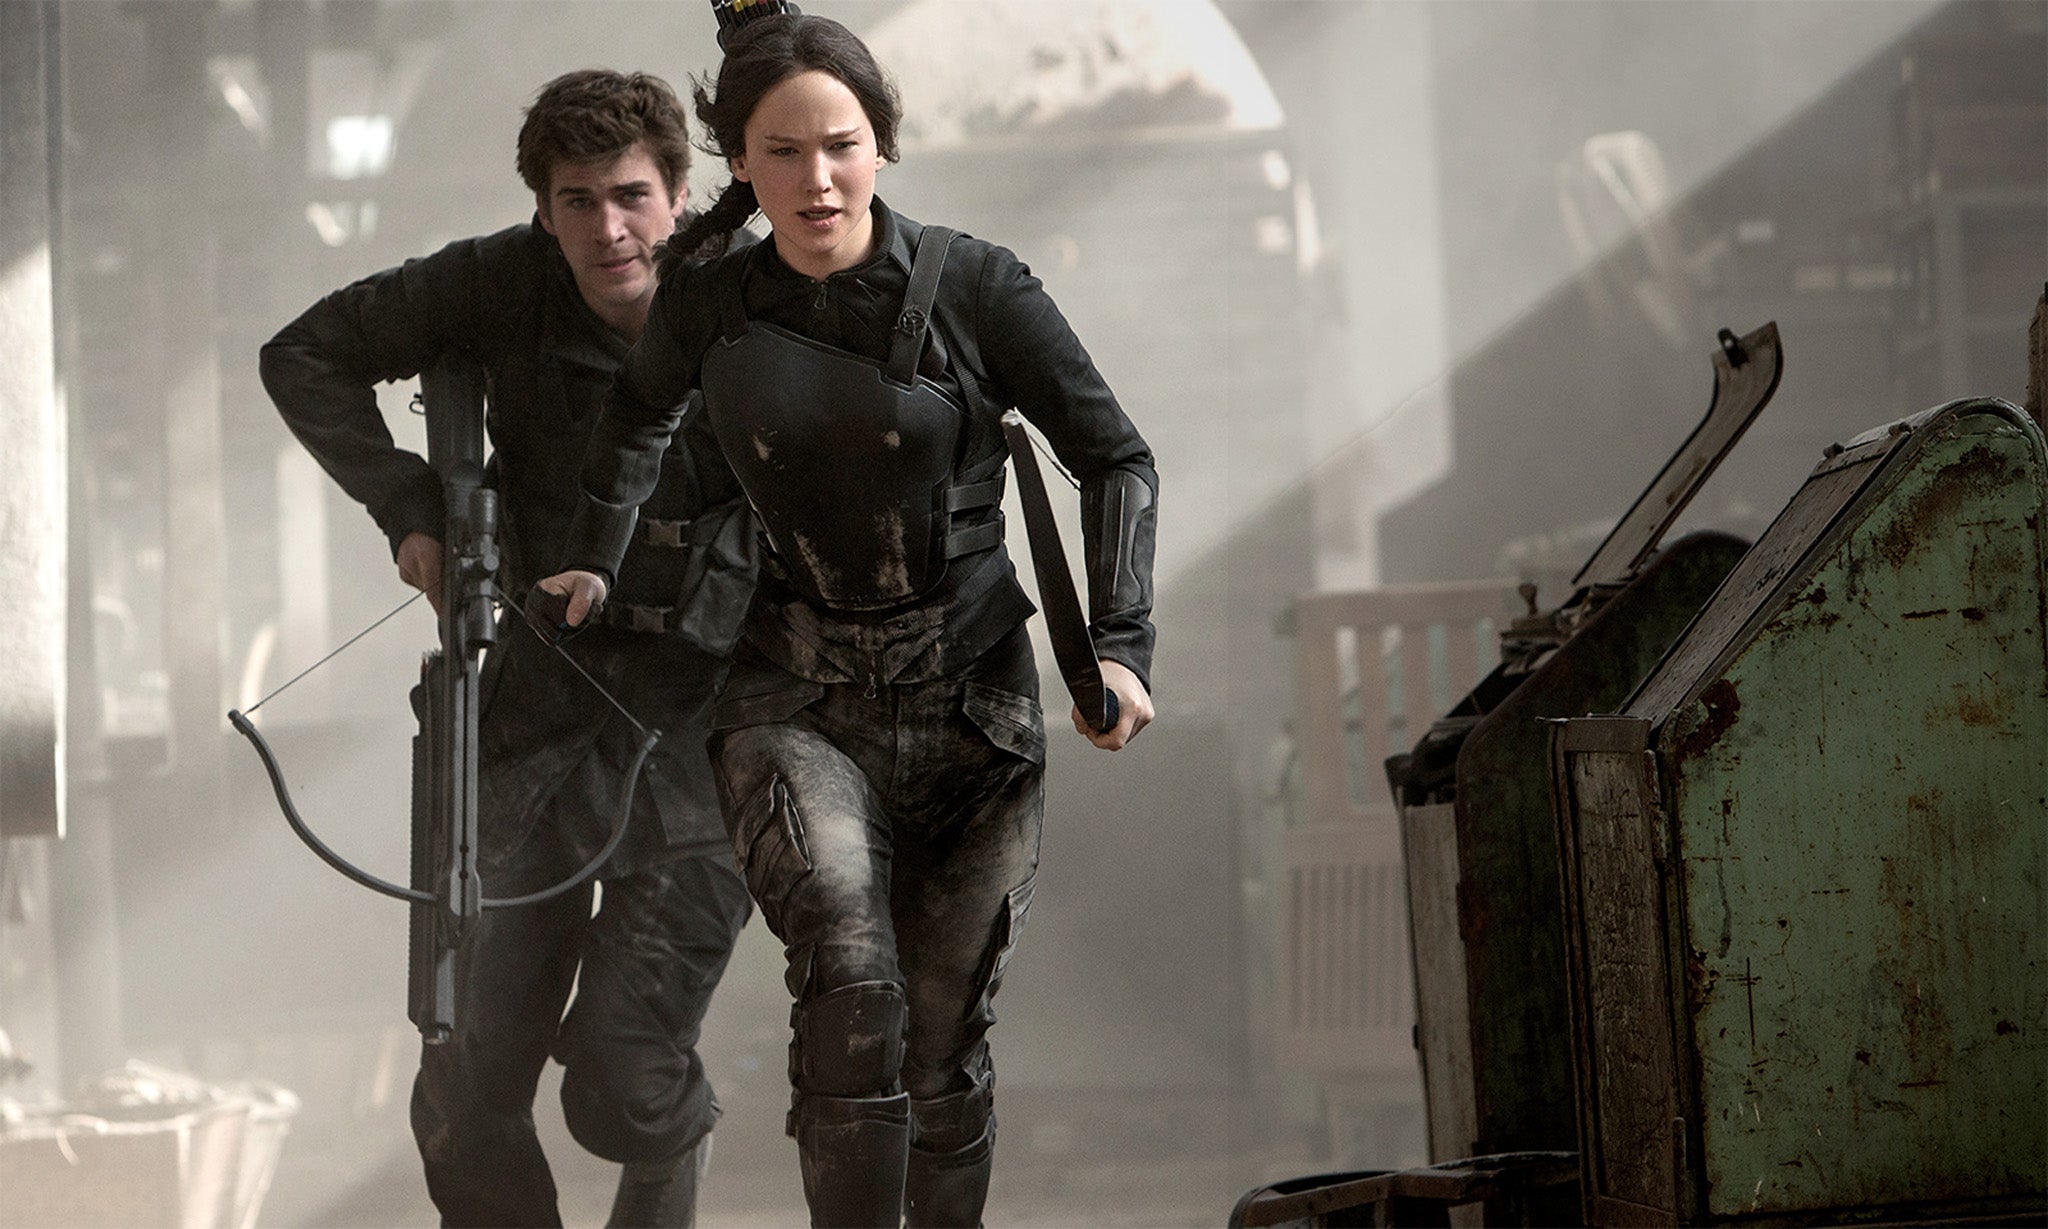 Jennifer Lawrence and Liam Hemsworth in The Hunger Games: Mockingjay Part 1